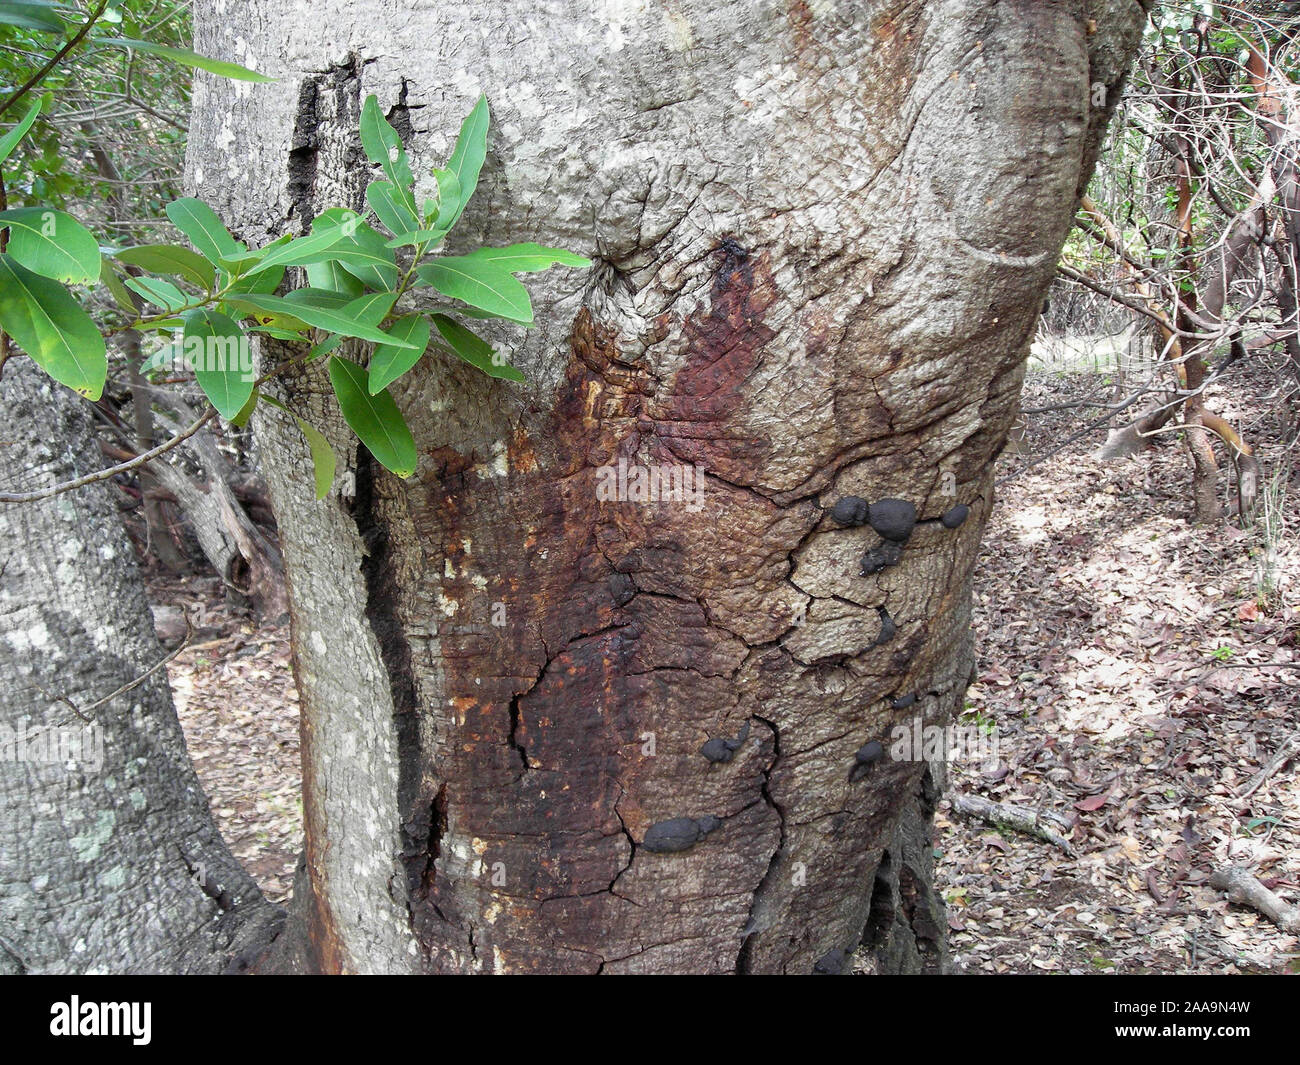 Discoloration on an oak tree trunk caused by Phytophthora ramorum. Stock Photo